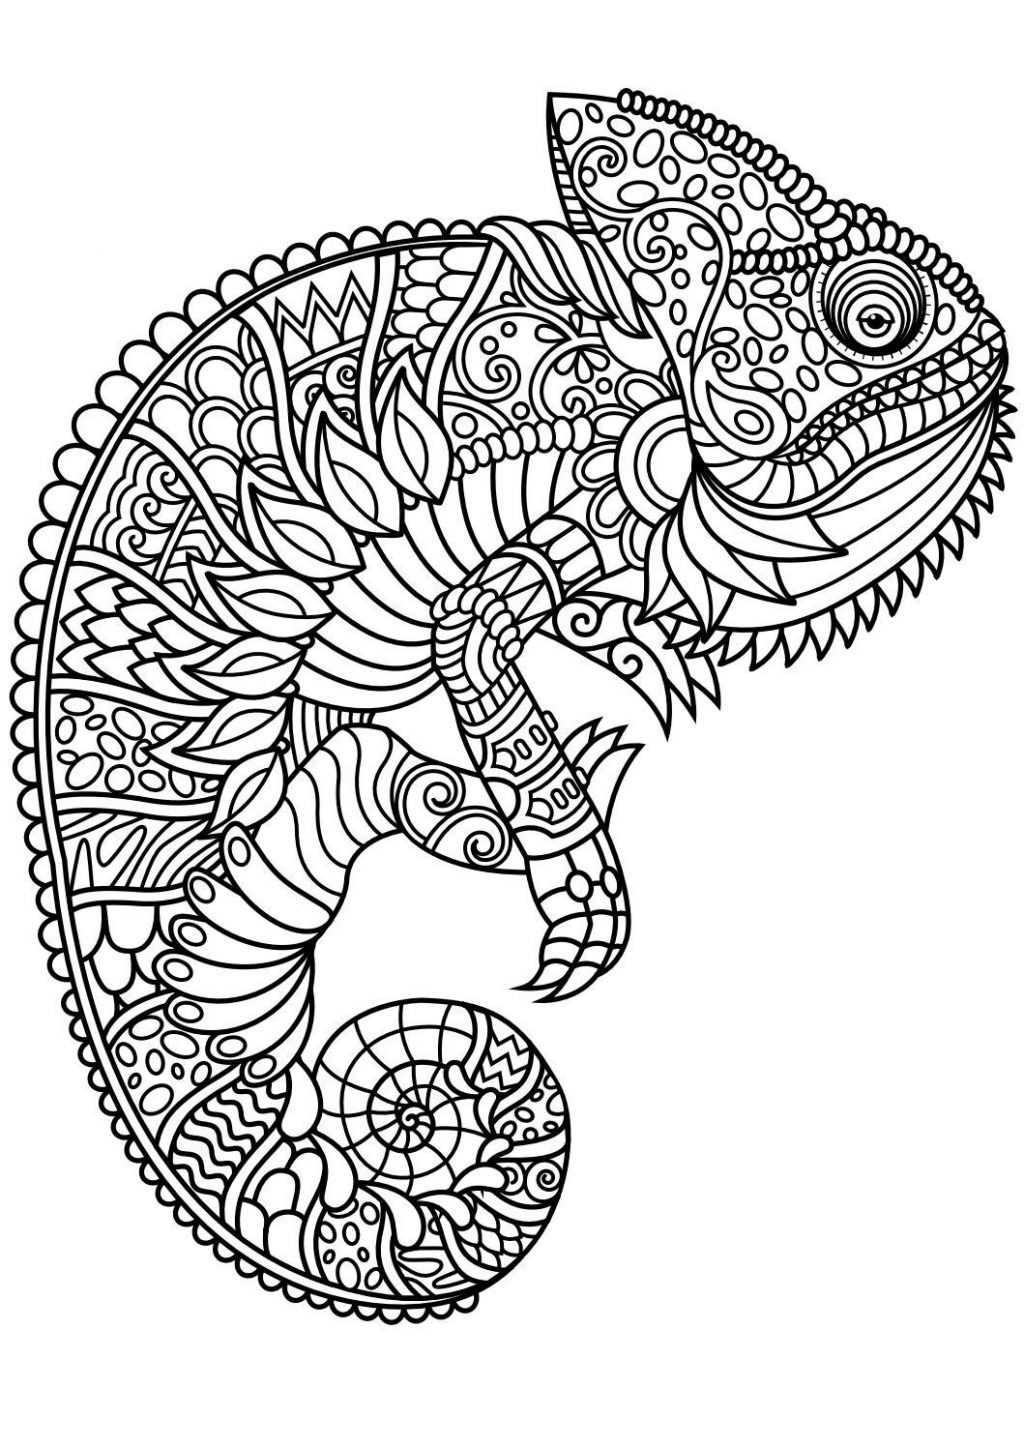 Coloring Pages : Coloring Pages Hard Photo Inspirations ... - Coloring  Library